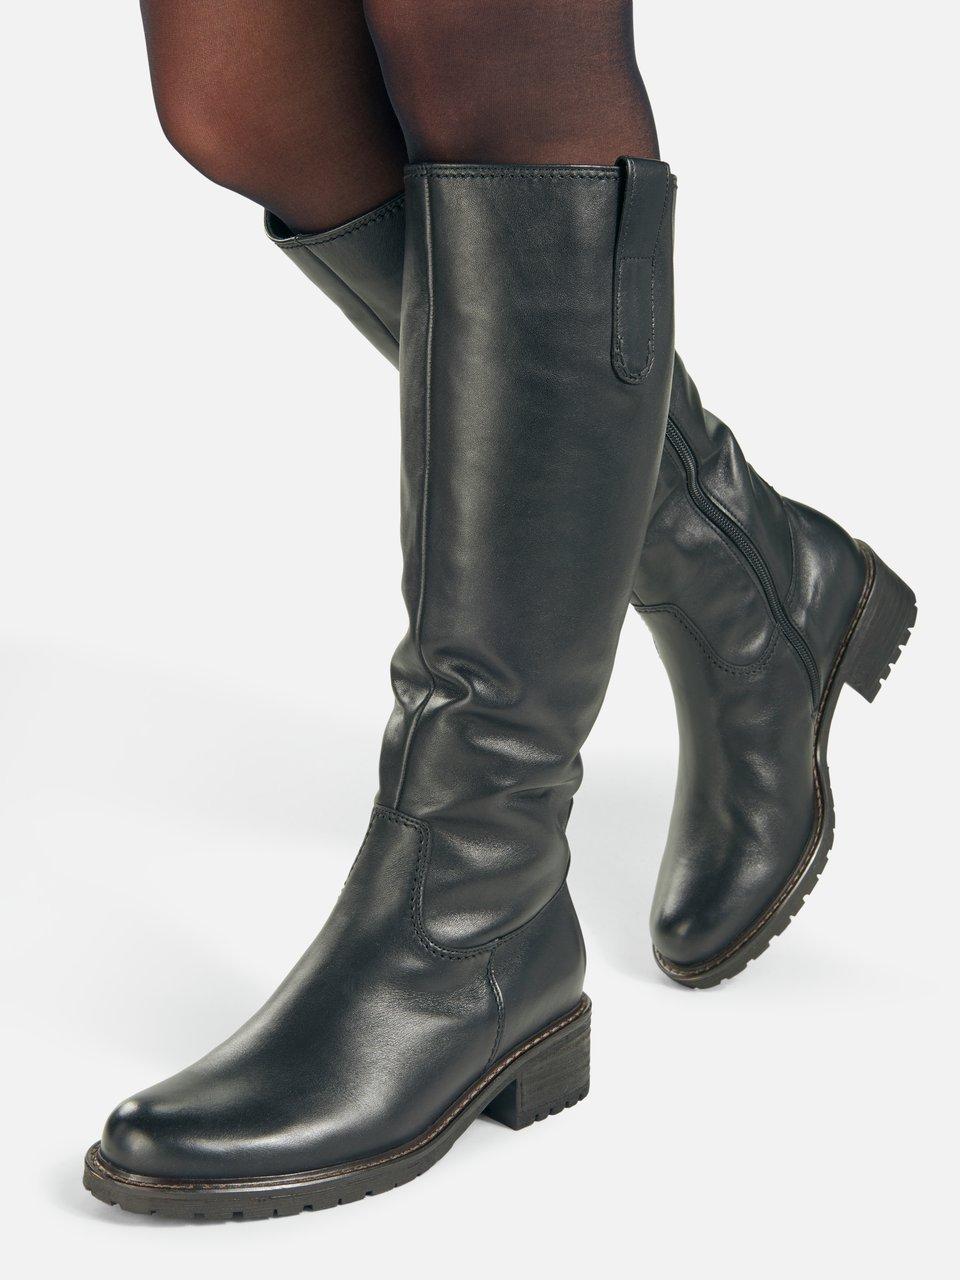 Comfort - High boots of nappa leather - black